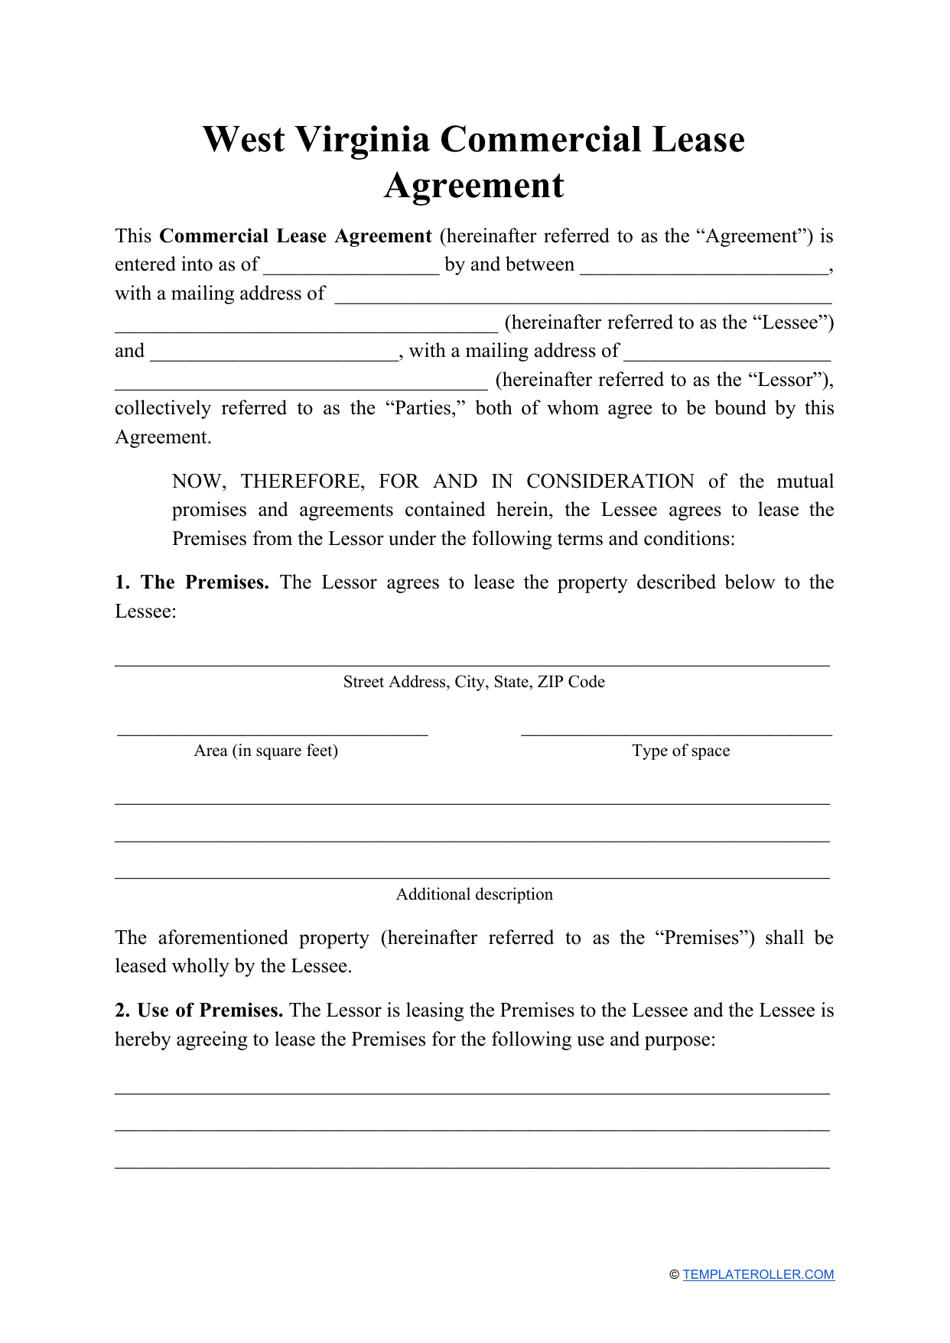 Commercial Lease Agreement Template - West Virginia, Page 1